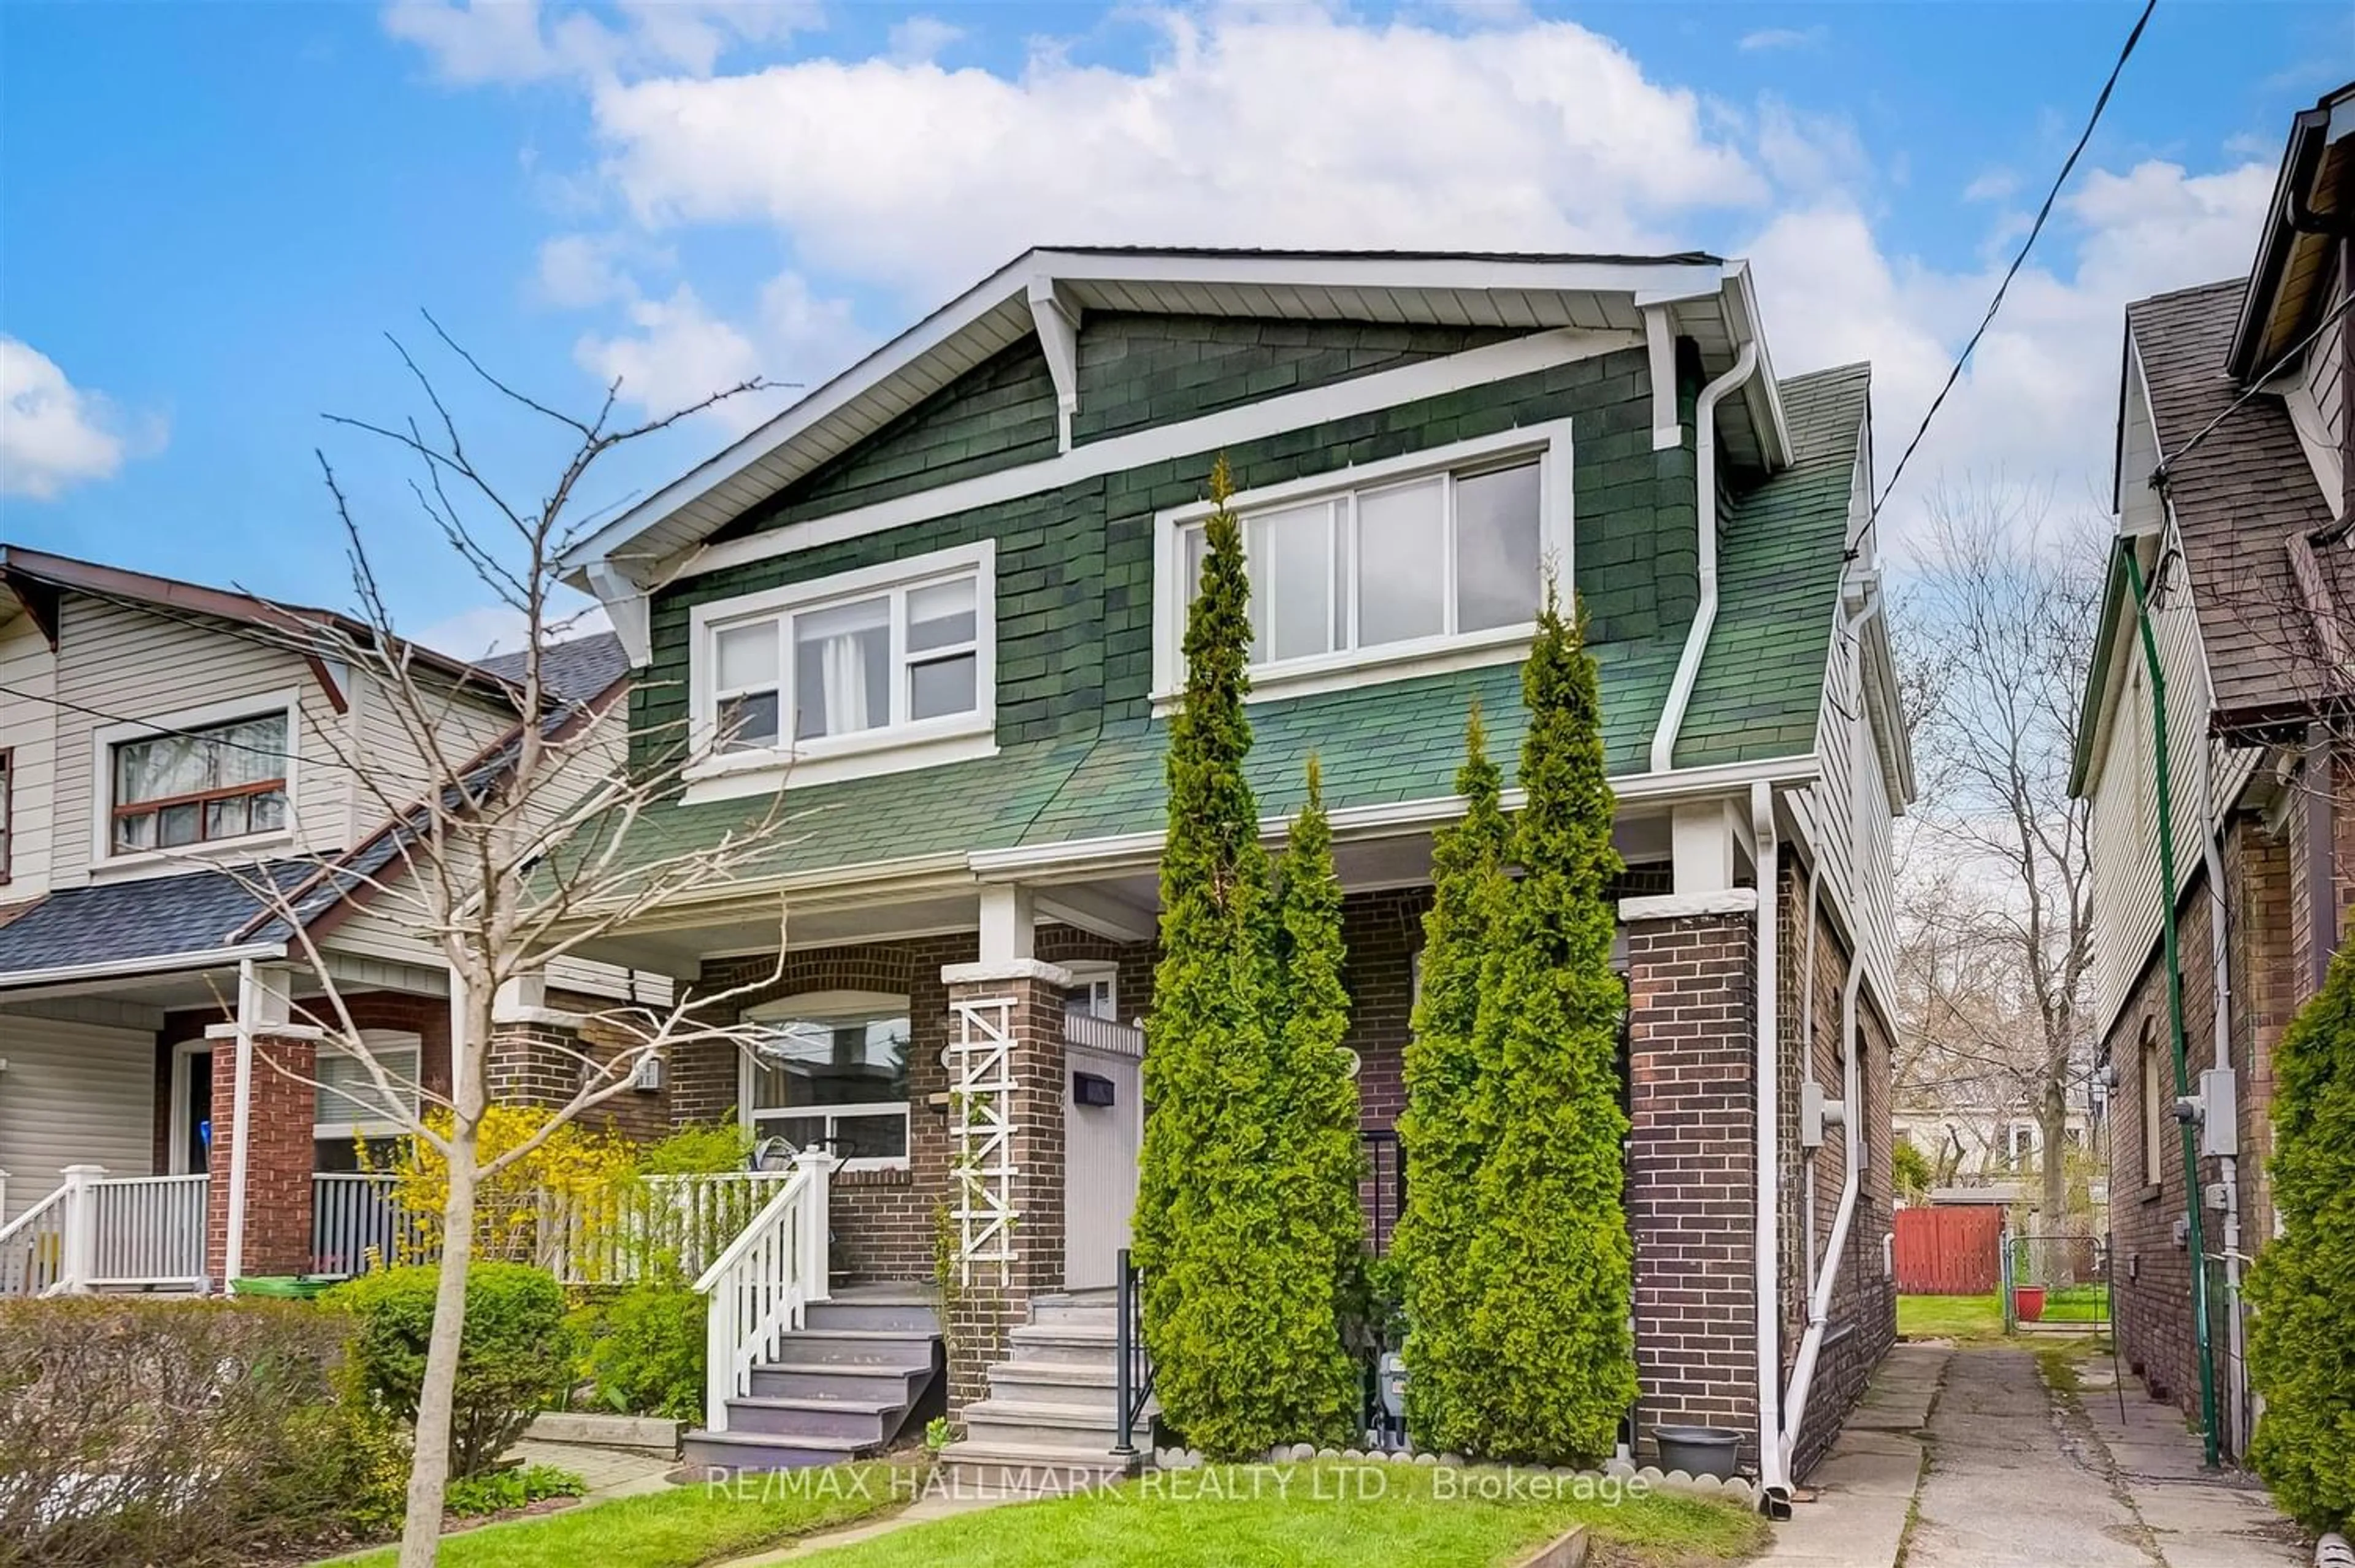 Frontside or backside of a home for 56 Mortimer Ave, Toronto Ontario M4K 2A1